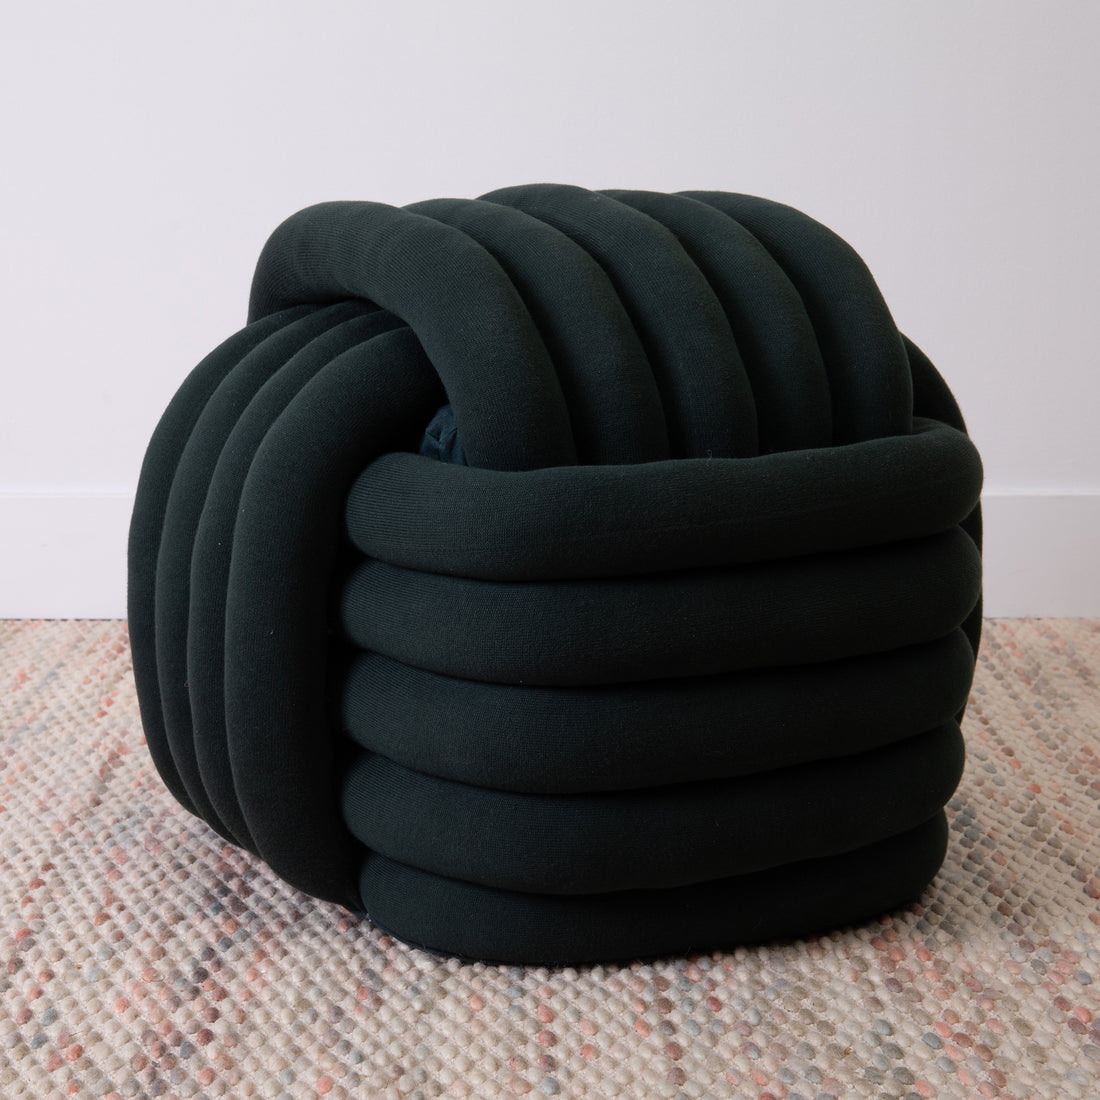 Knotted pouf - Large - Antique green